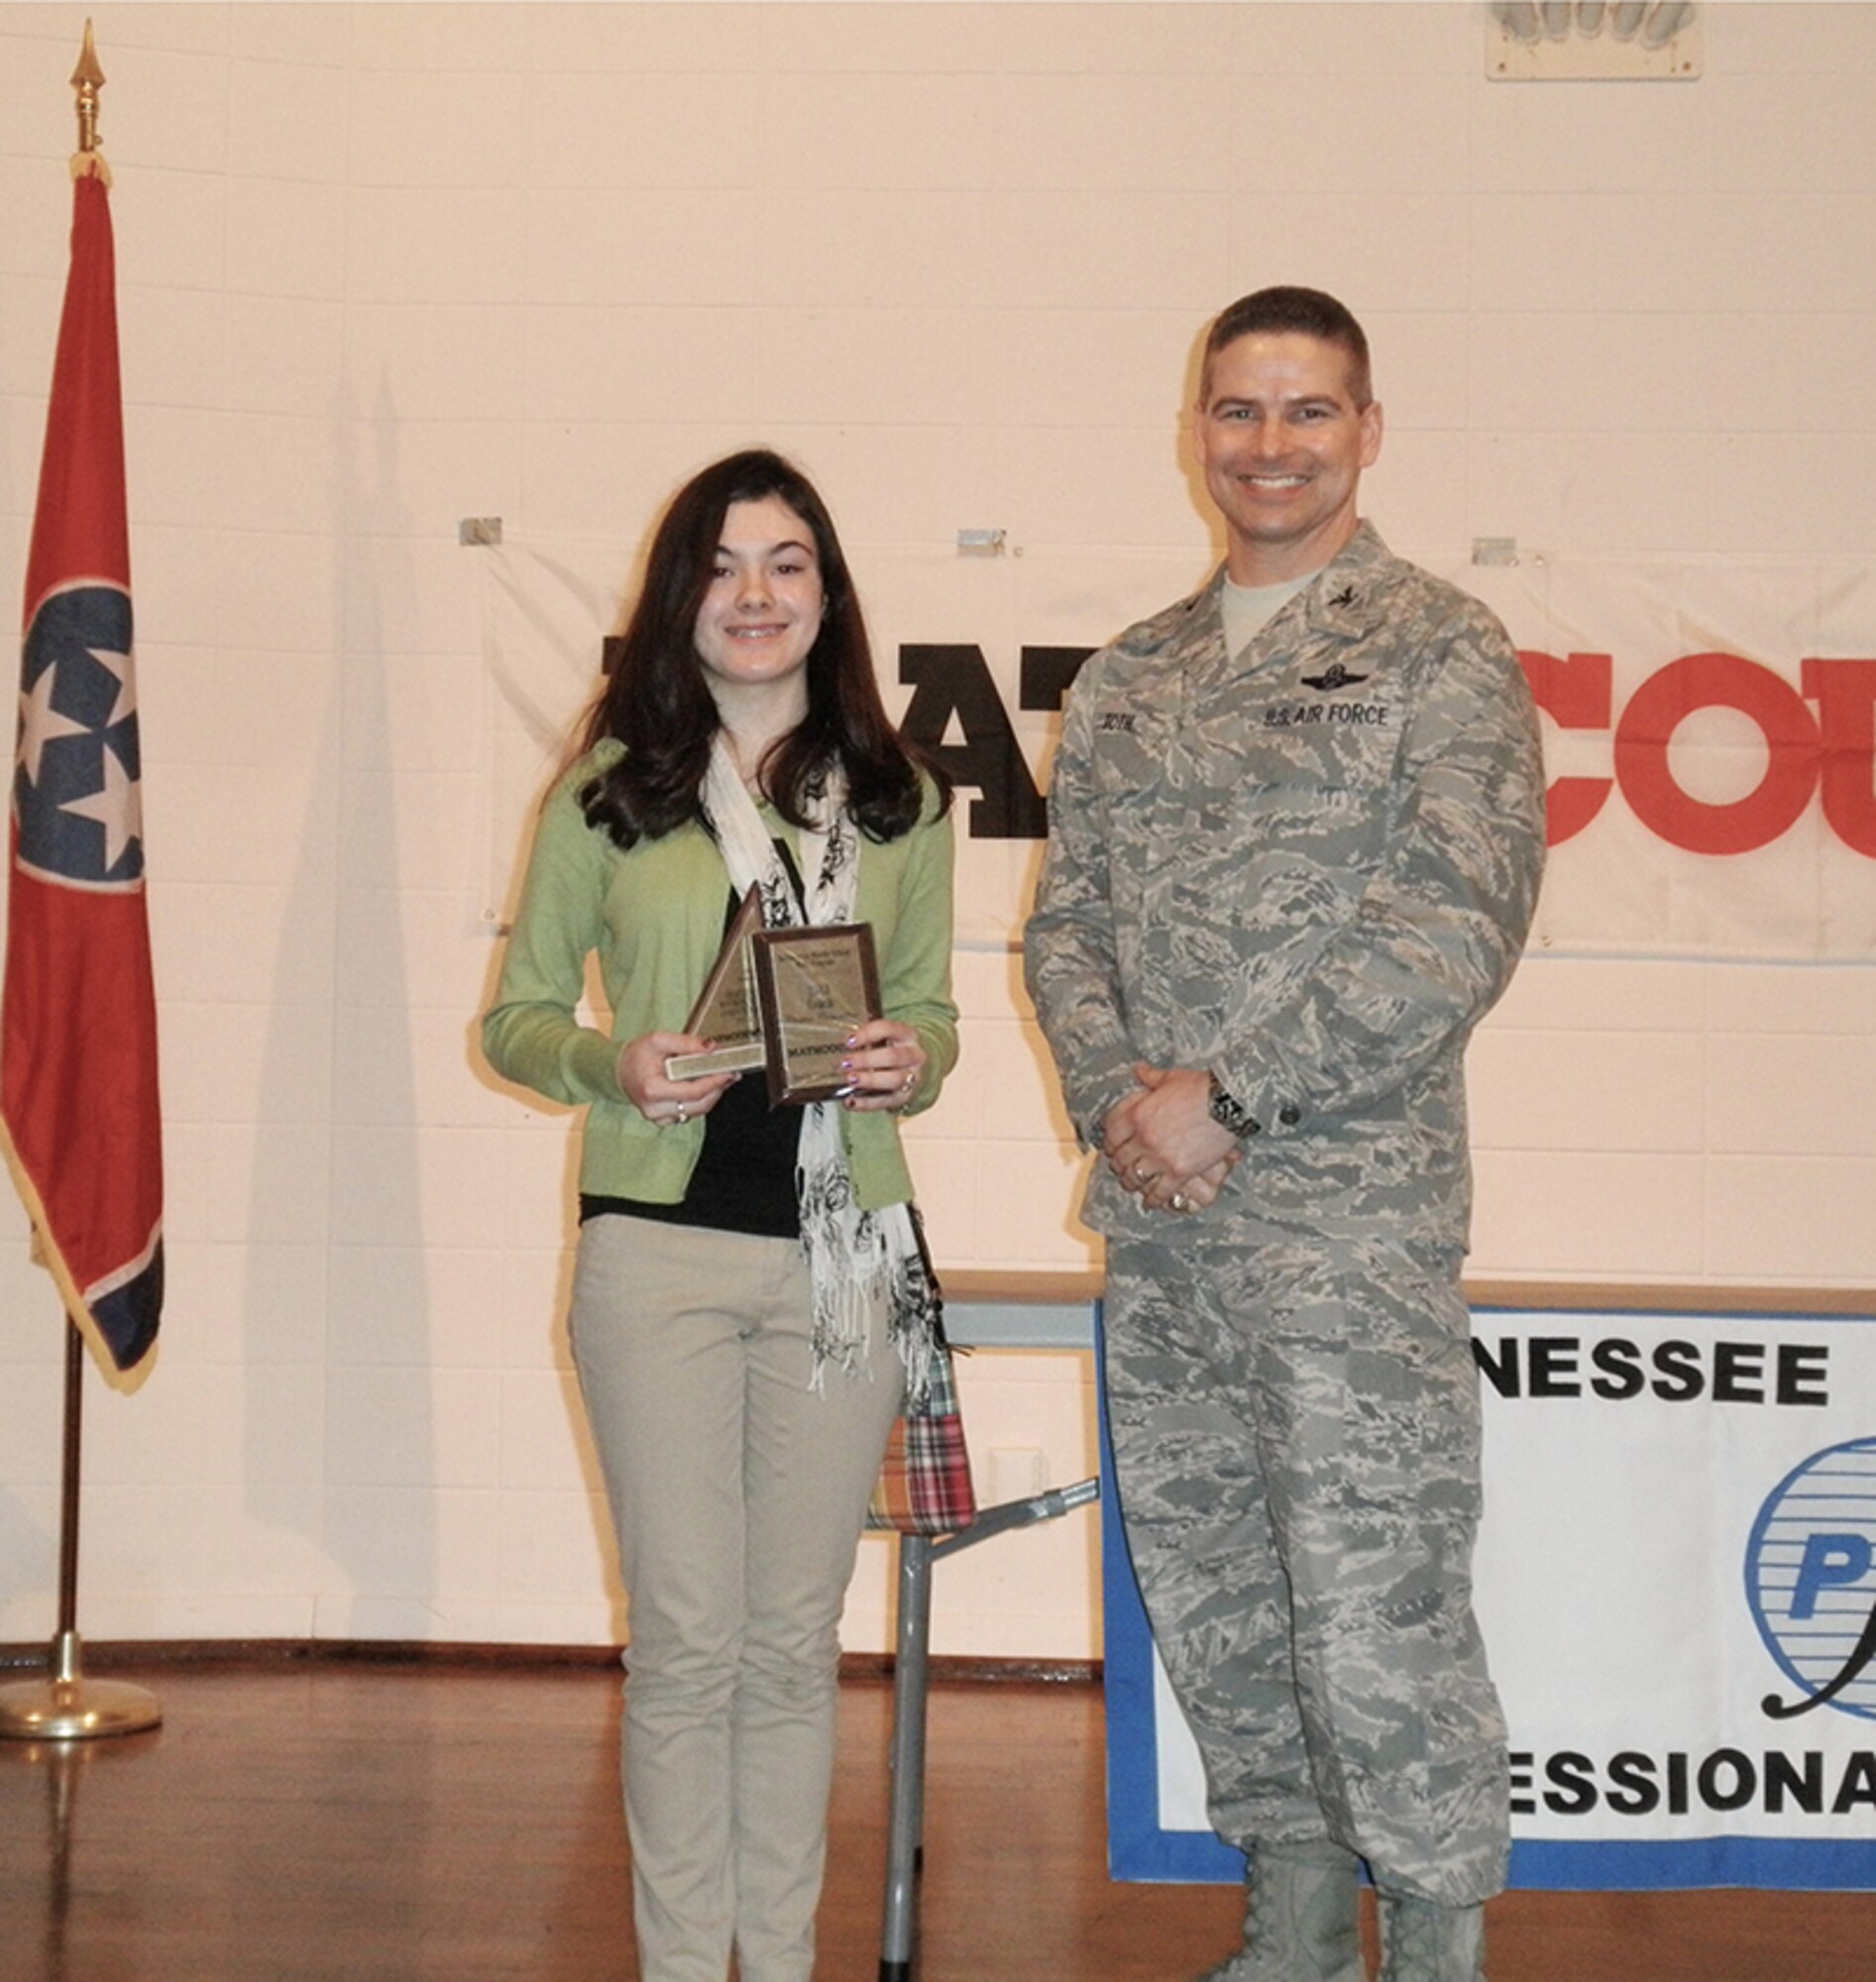 From left, Arnold Engineering Development Complex Commander, Col. Raymond Toth with West Middle School’s Morgan Anderson, first place individual. (Photo provided)